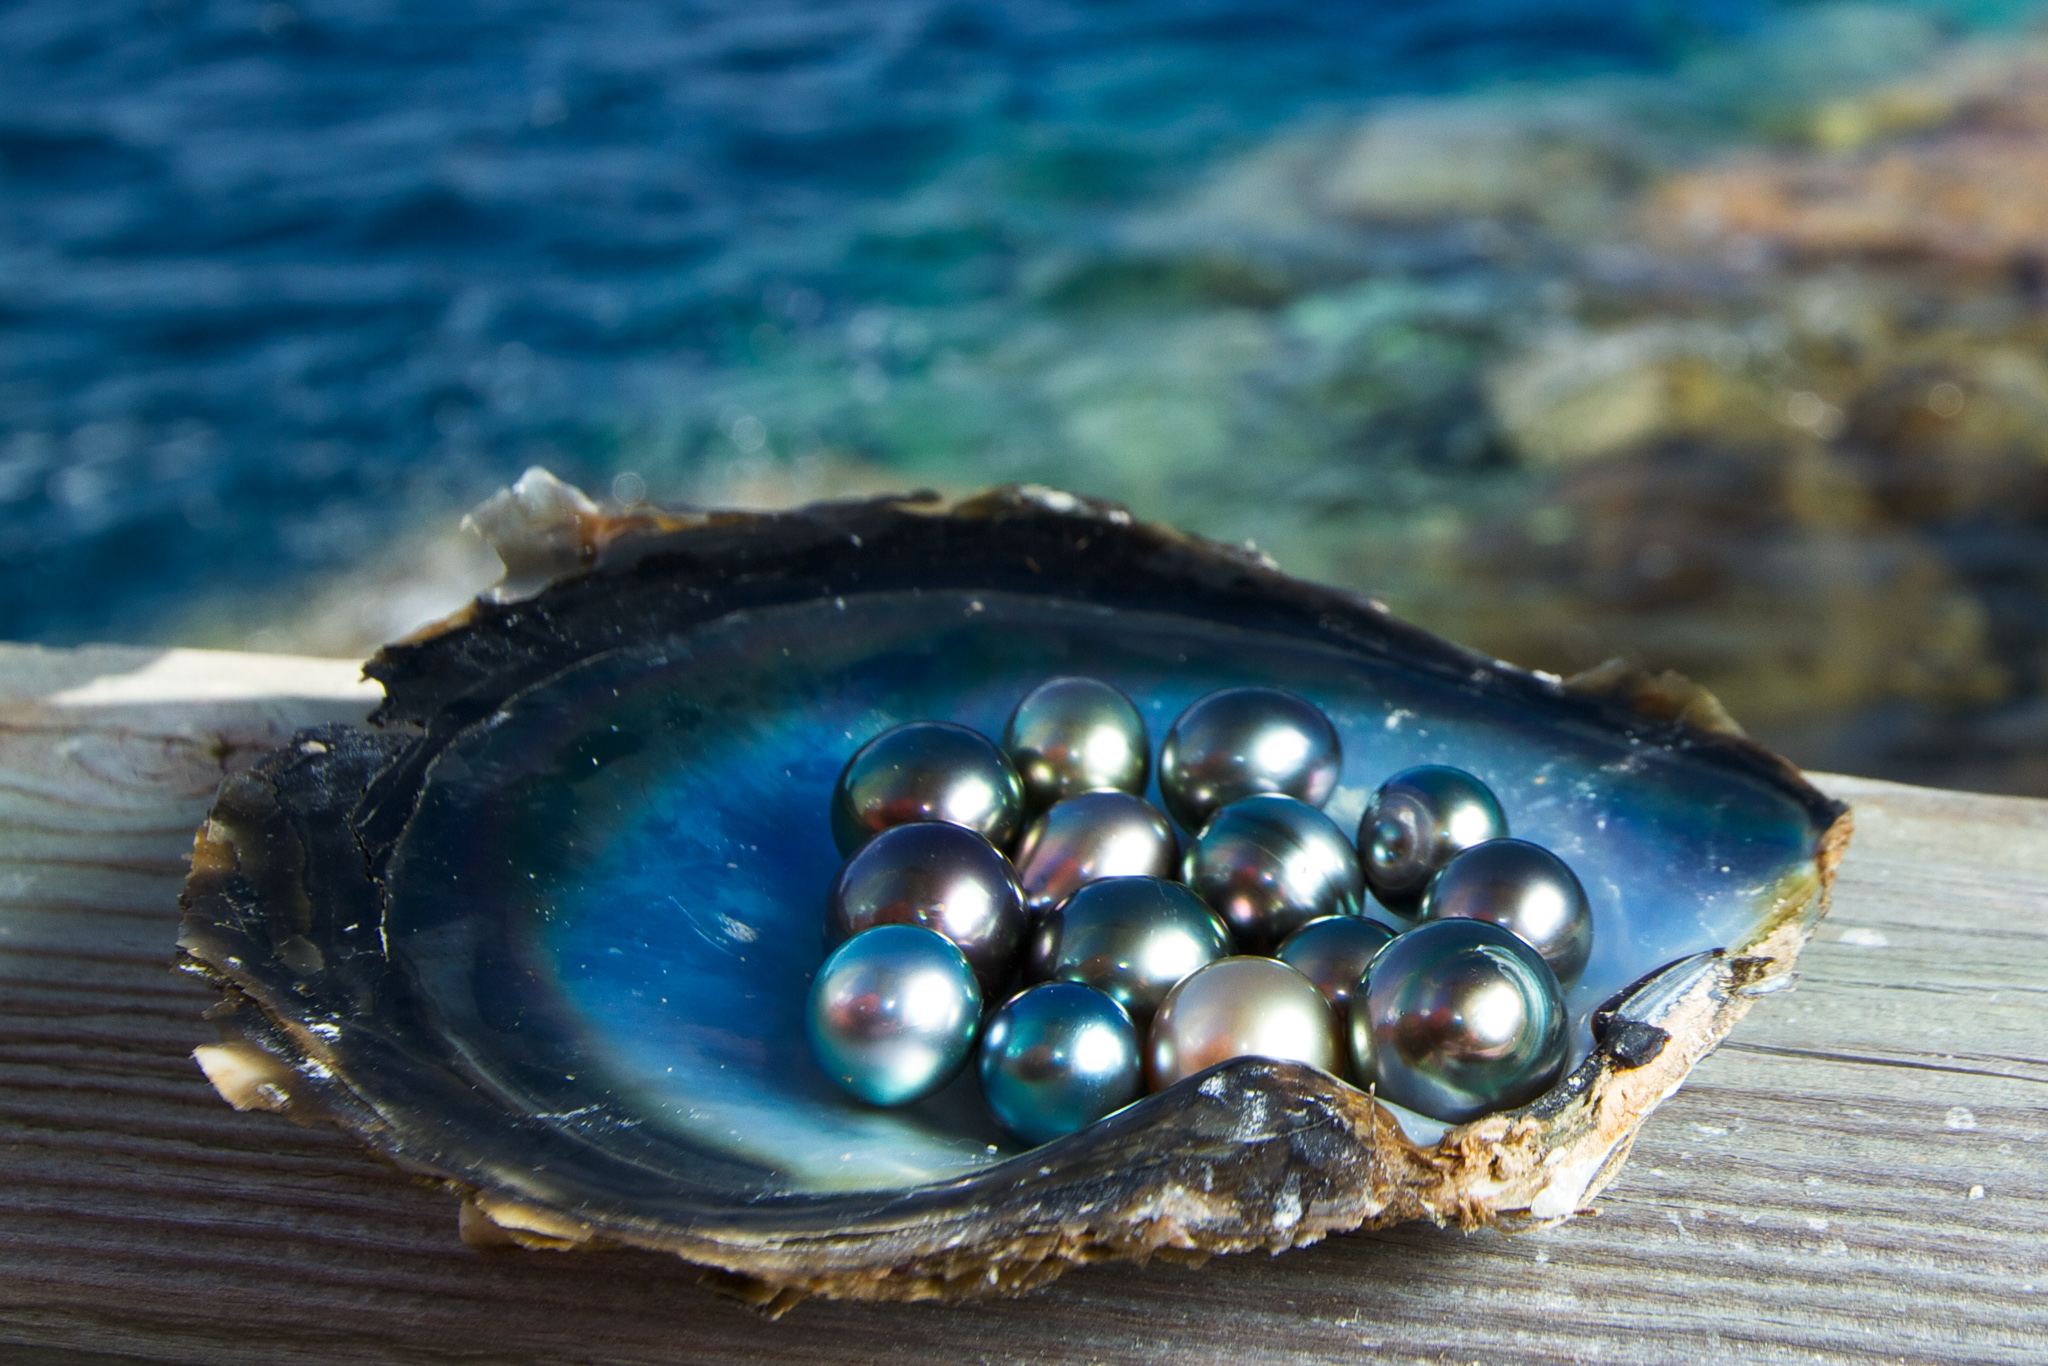 Are Pearls Really Eco-Friendly Gems? Some Say No - Pearls of Wisdom